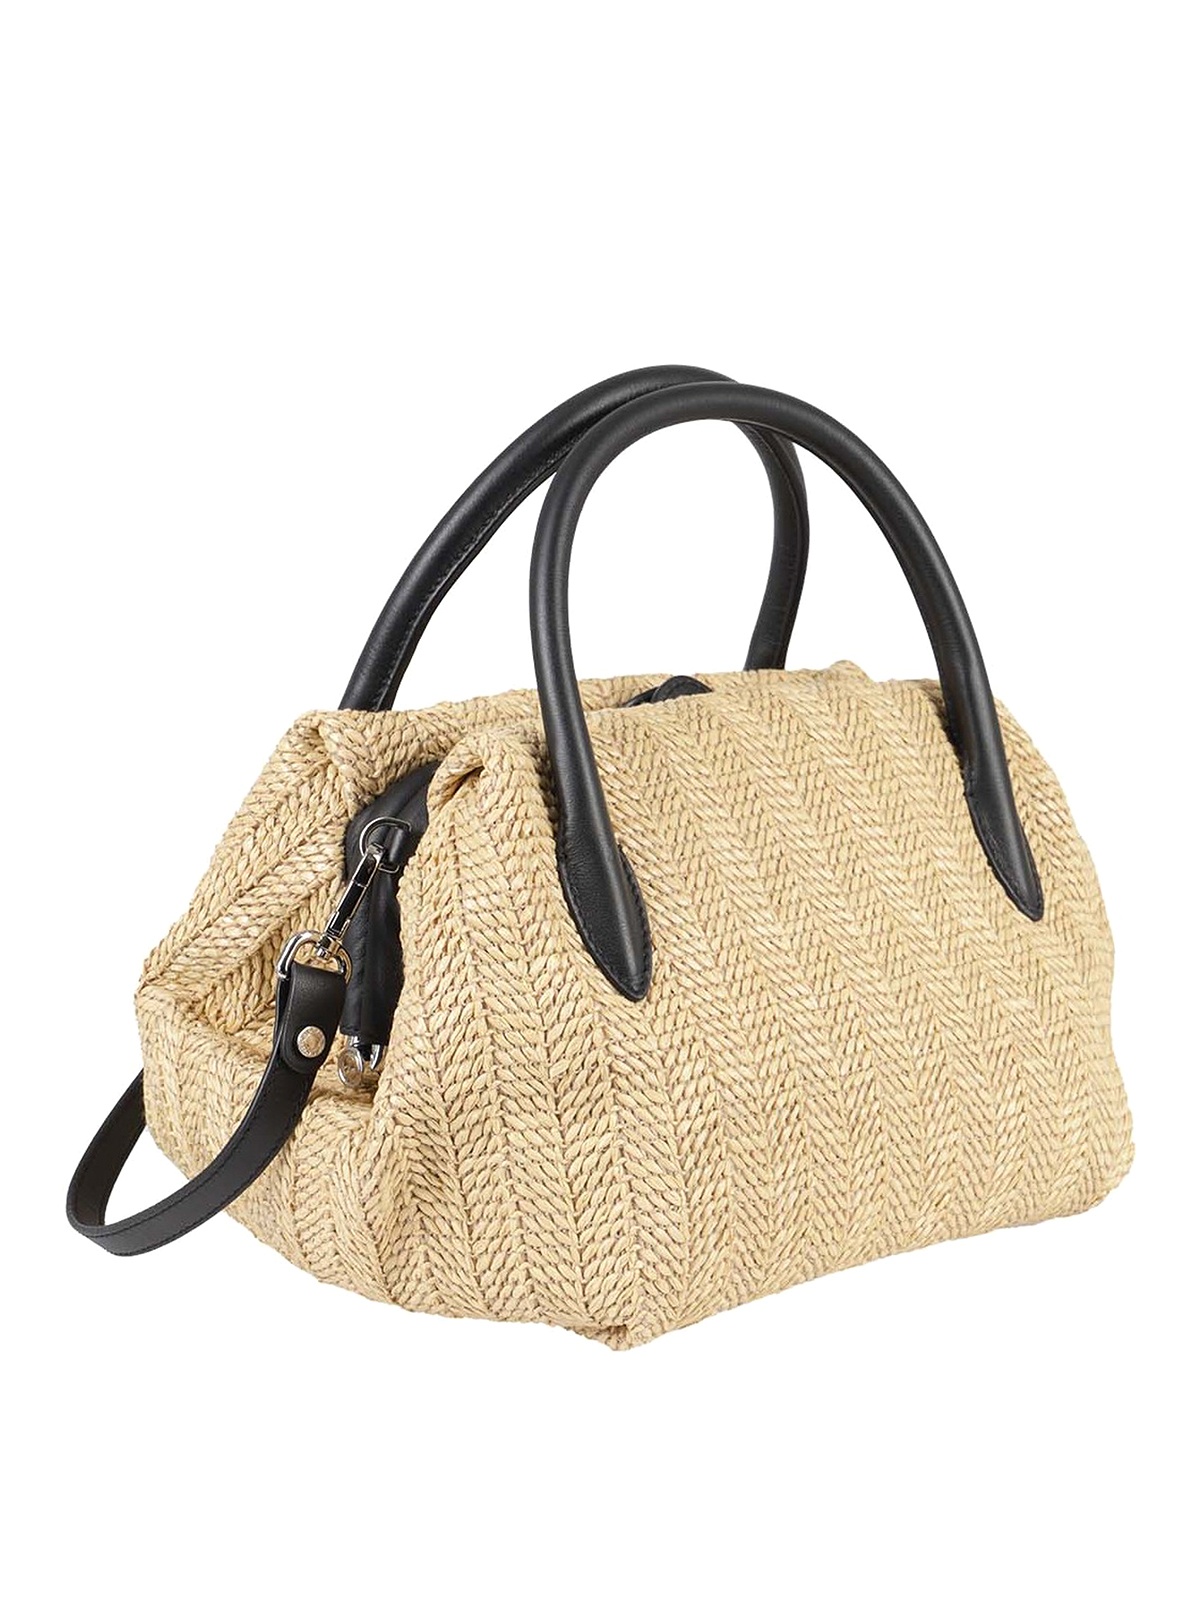 Totes bags Gianni Chiarini - Colette straw tote - BS8406CLPGLRIGPL4218